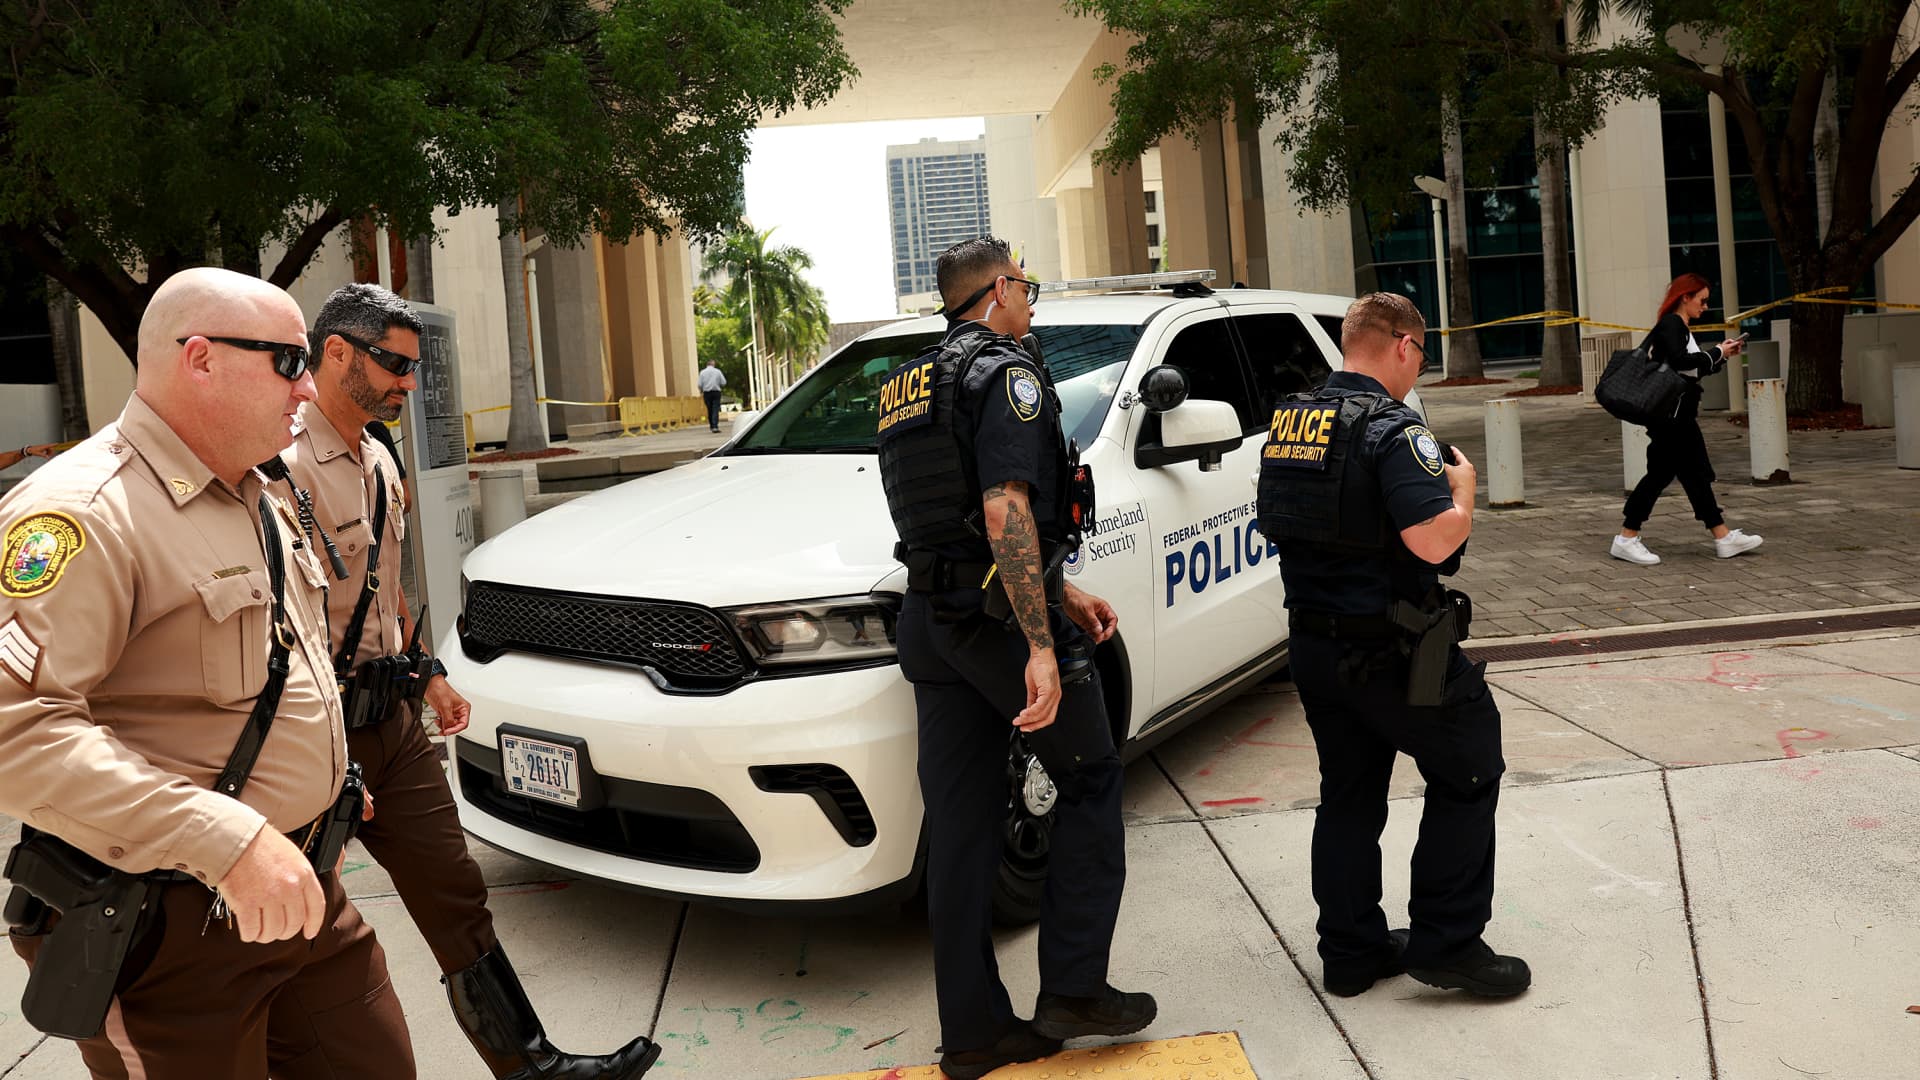 Department of Homeland Security police and Miami-Dade police walk in front of the Wilkie D. Ferguson Jr. United States Federal Courthouse where former President Donald Trump is scheduled to appear on June 12, 2023 in Miami, Florida.